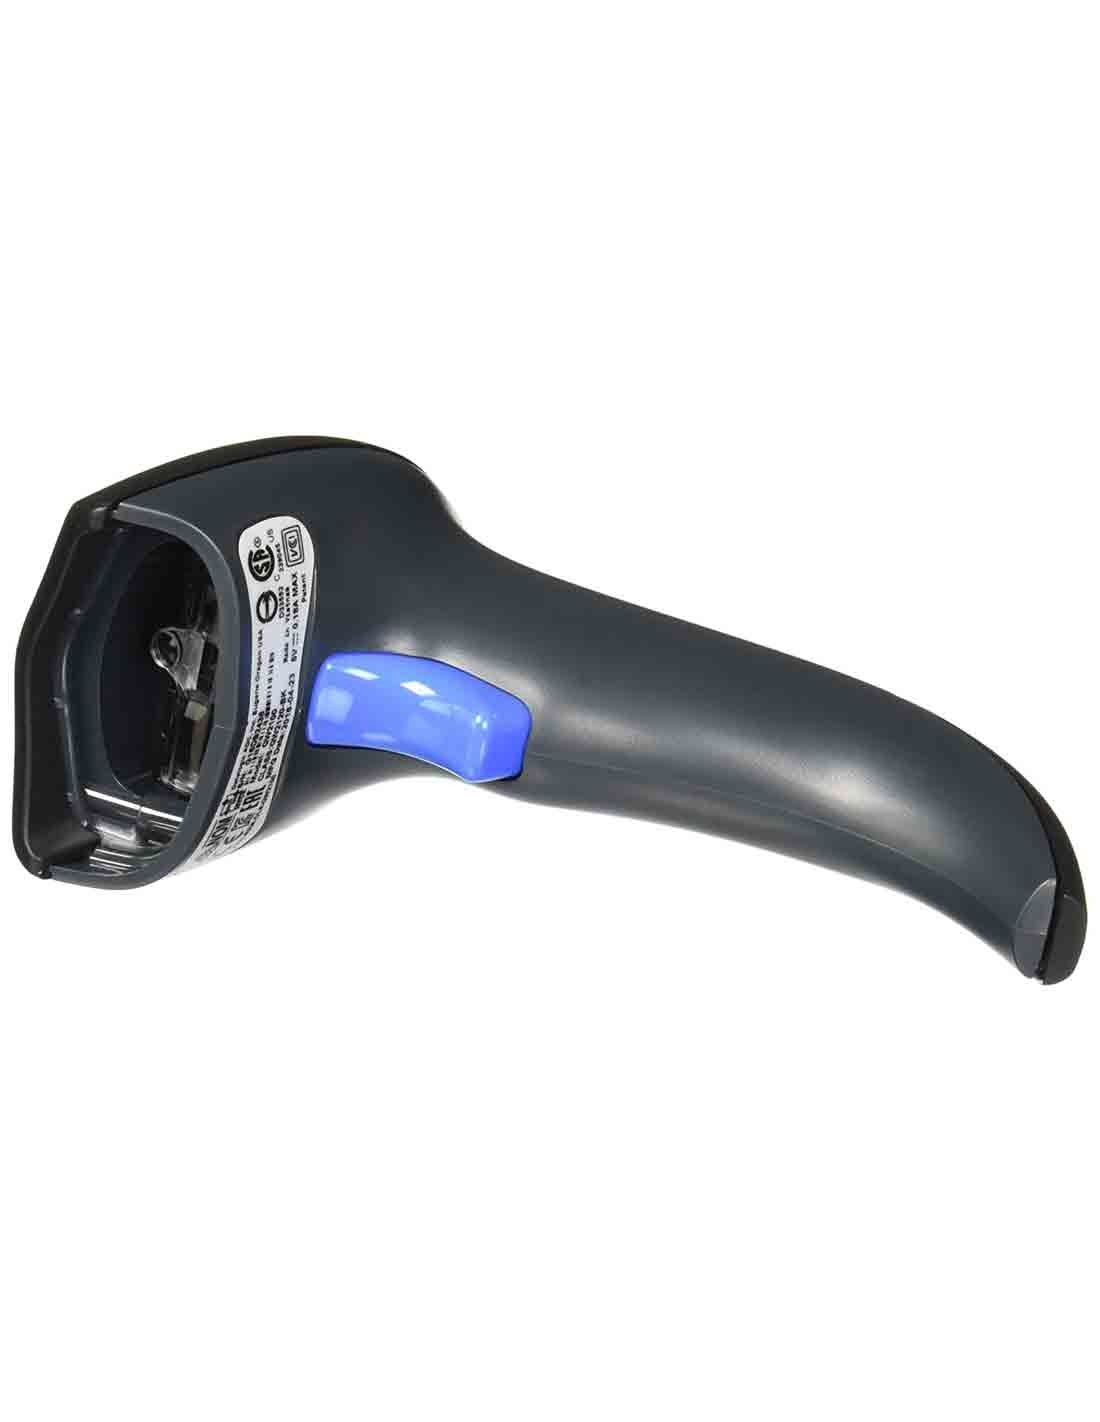 Datalogic QW2120 HandHeld Barcode Scanner small and ergonomic design at a cheap price in Dubai